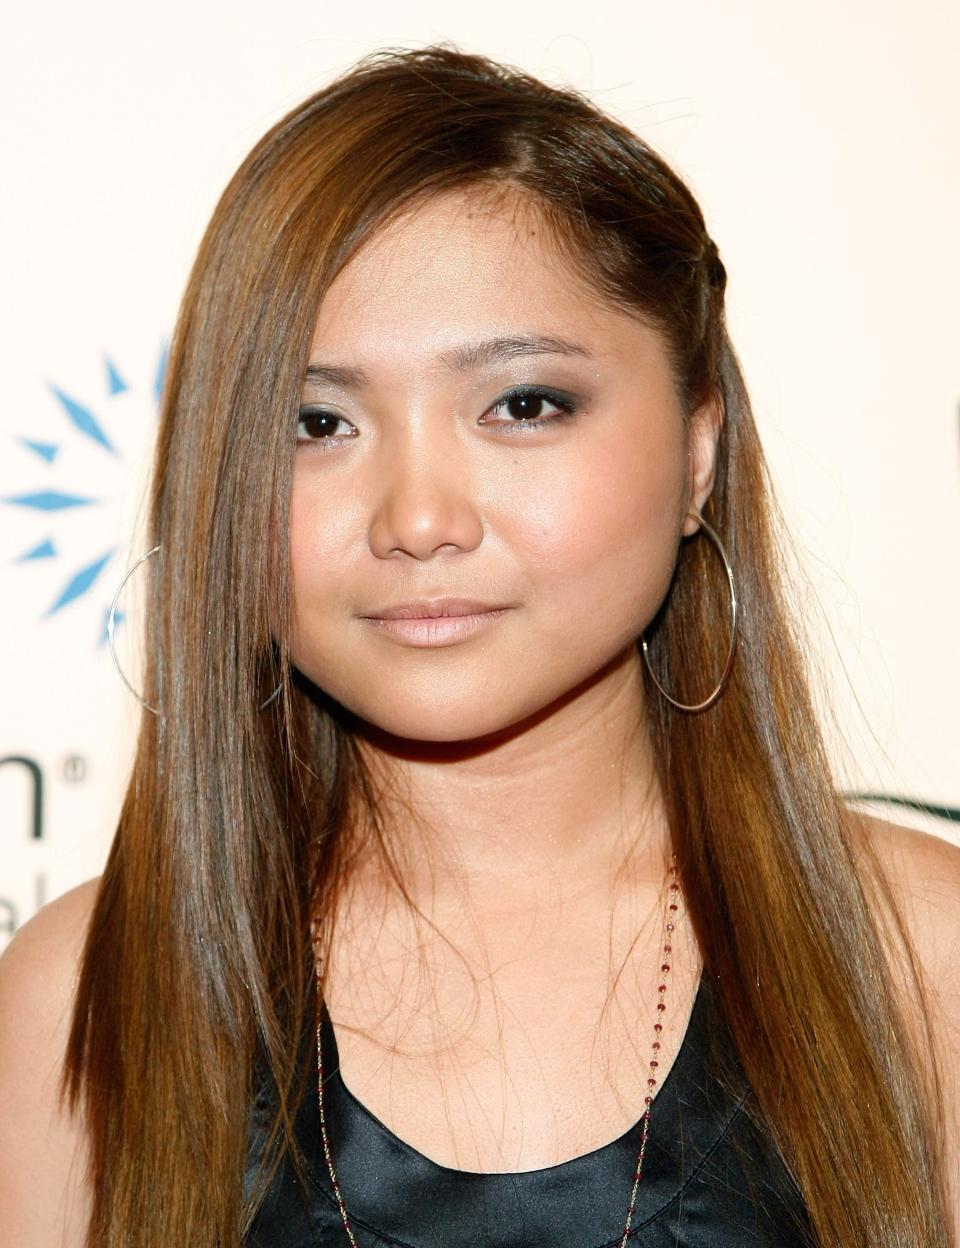 Singer Charice Pempengco arrives at the 14th annual Andre Agassi Charitable Foundation's Grand Slam for Children benefit concert at the Wynn Las Vegas September 26, 2009 in Las Vegas, Nevada. The event raises funds for the Andre Agassi Foundation for Education, which helps improve education for underprivileged youth in the Las Vegas community. (Photo by Ethan Miller/Getty Images)